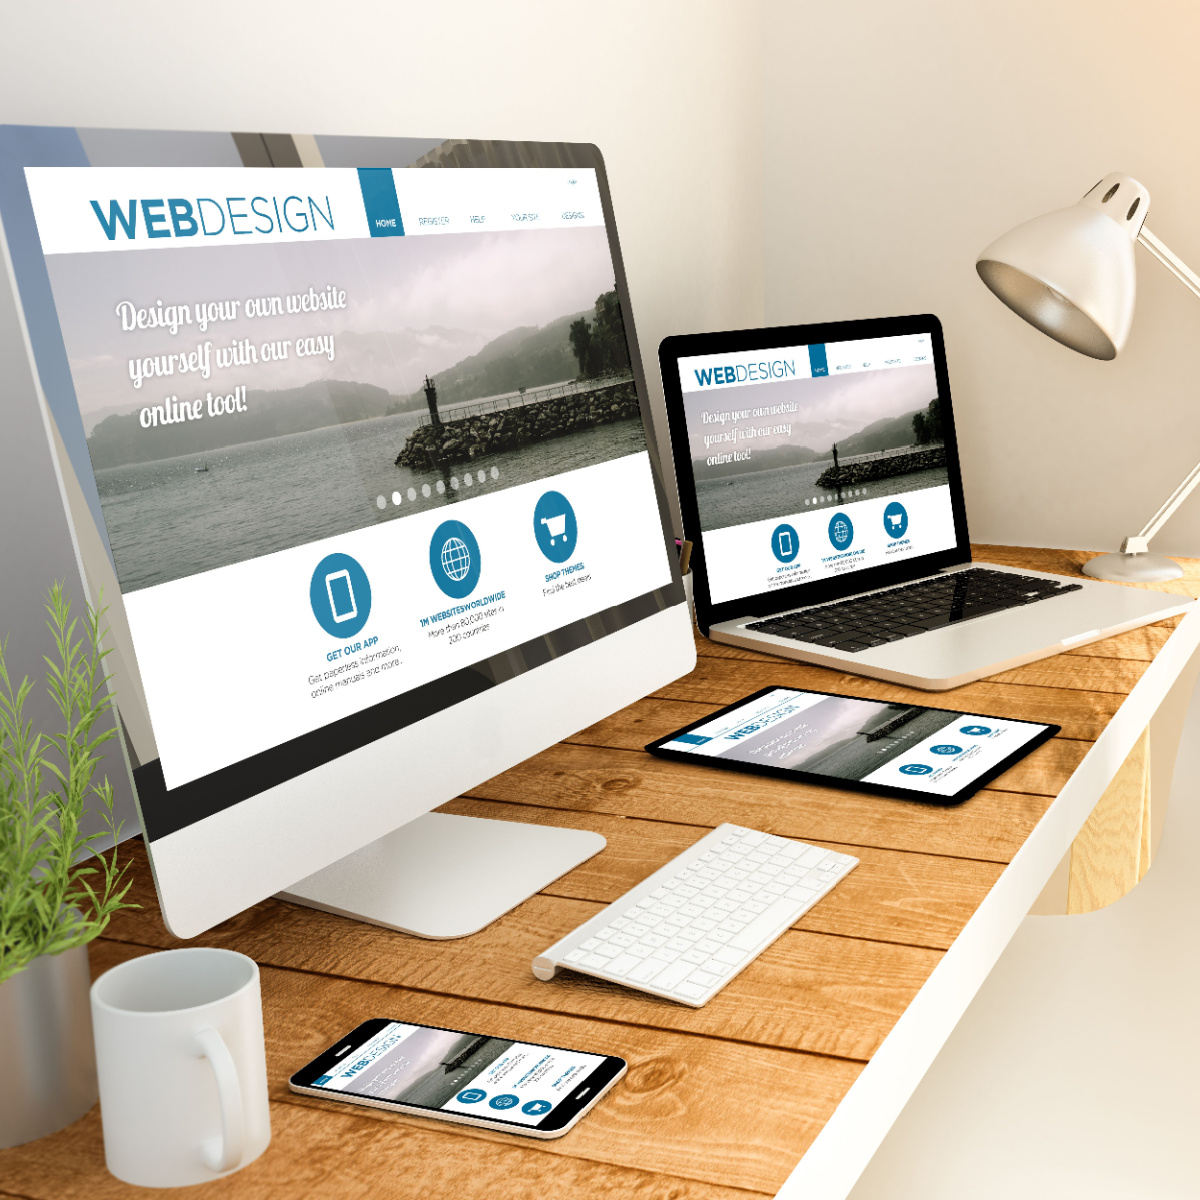 Your Houston web design should account for your digital marketing plan.